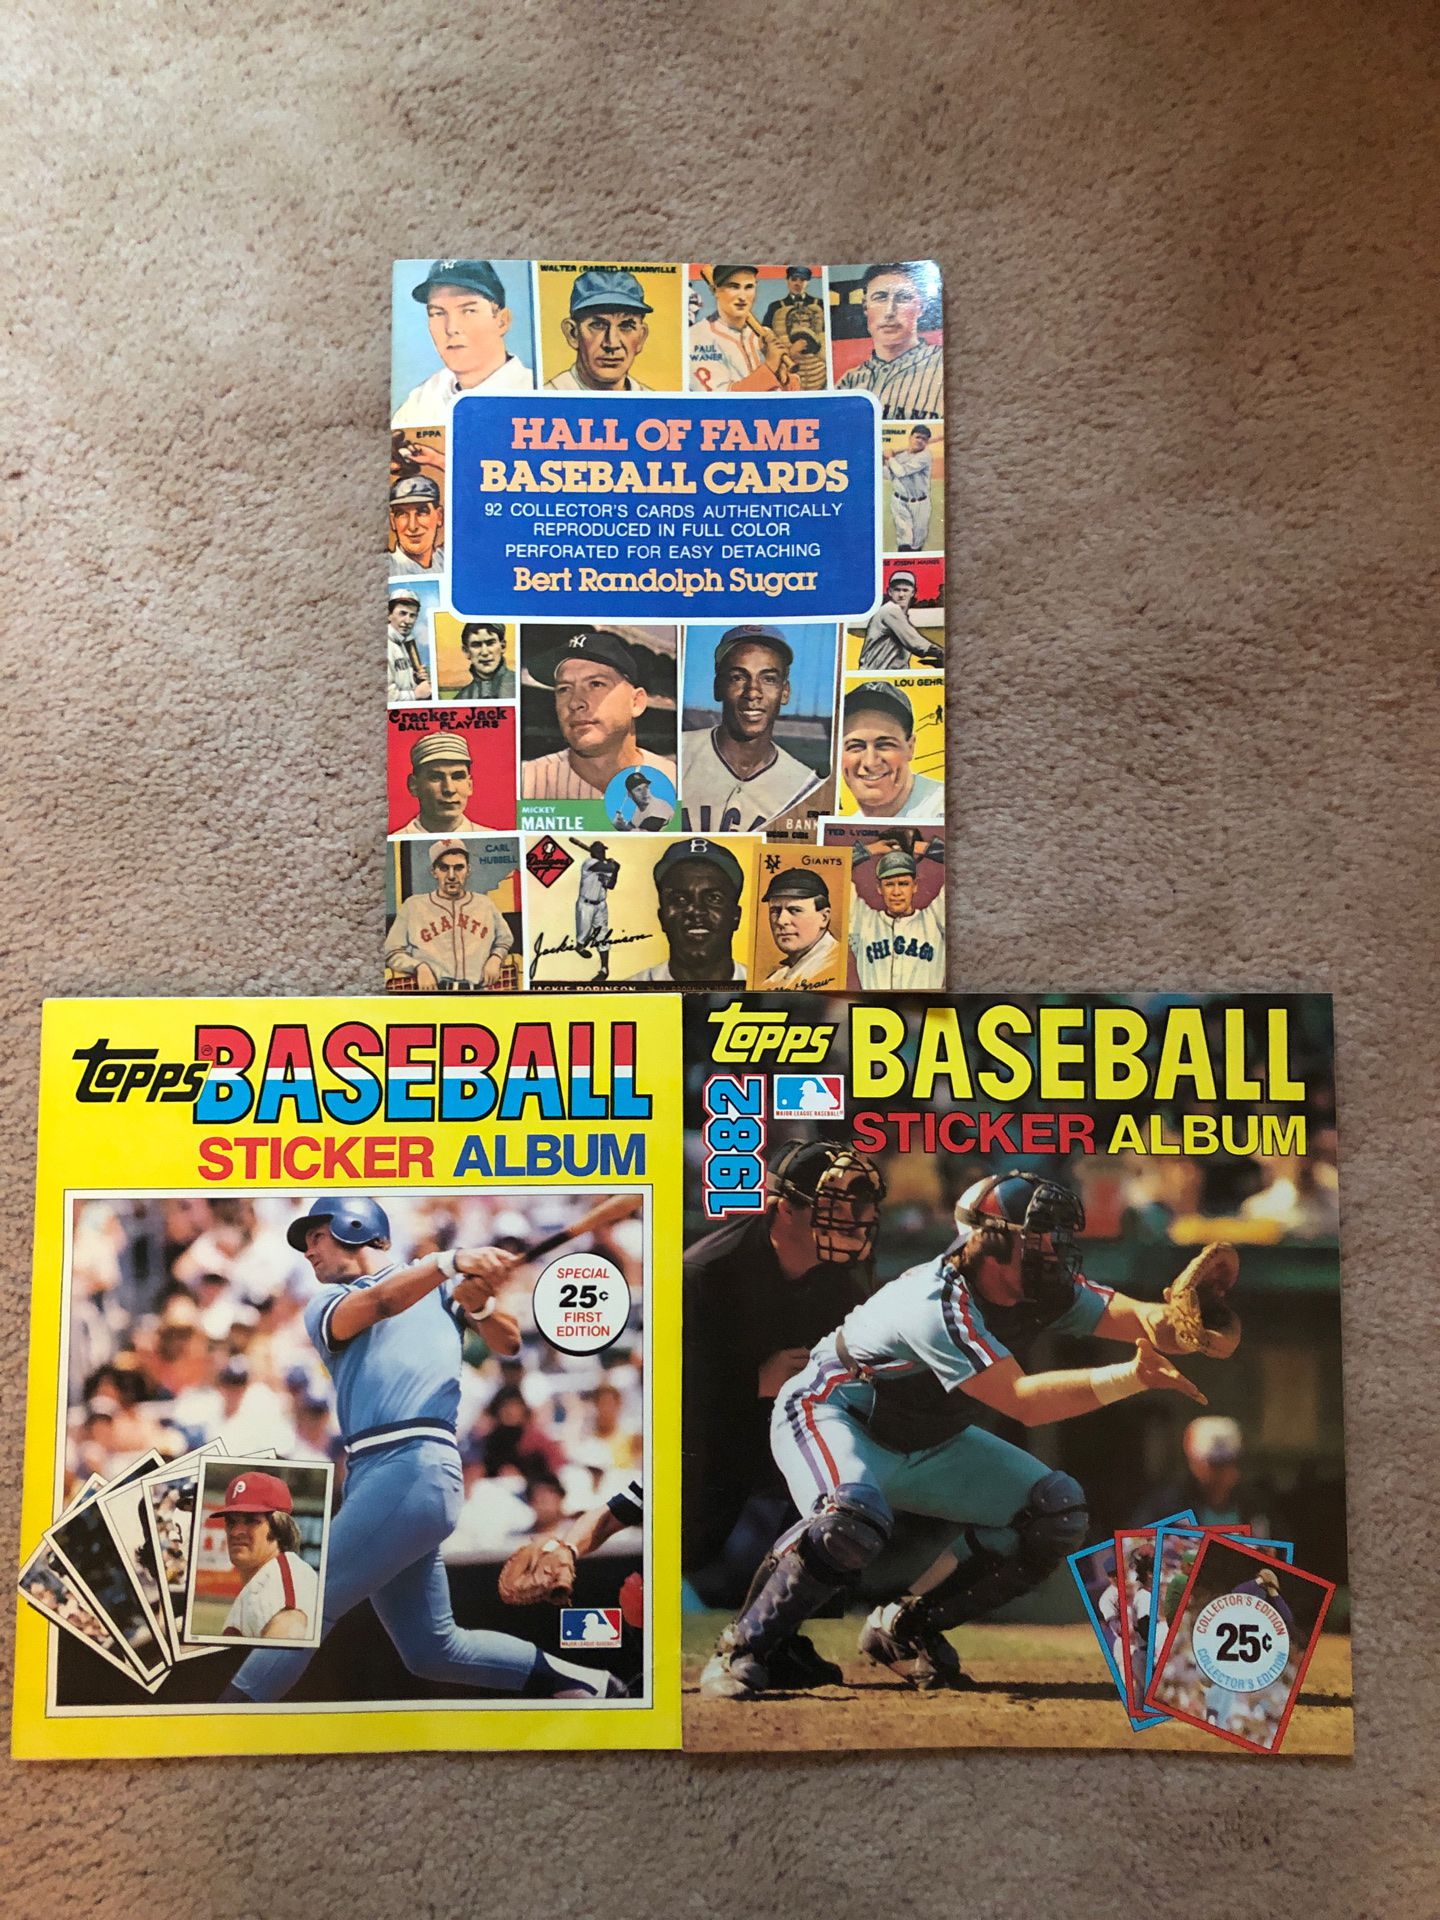 Baseball Items - Sticker Albums and Hall of Fame Reproduction Cards